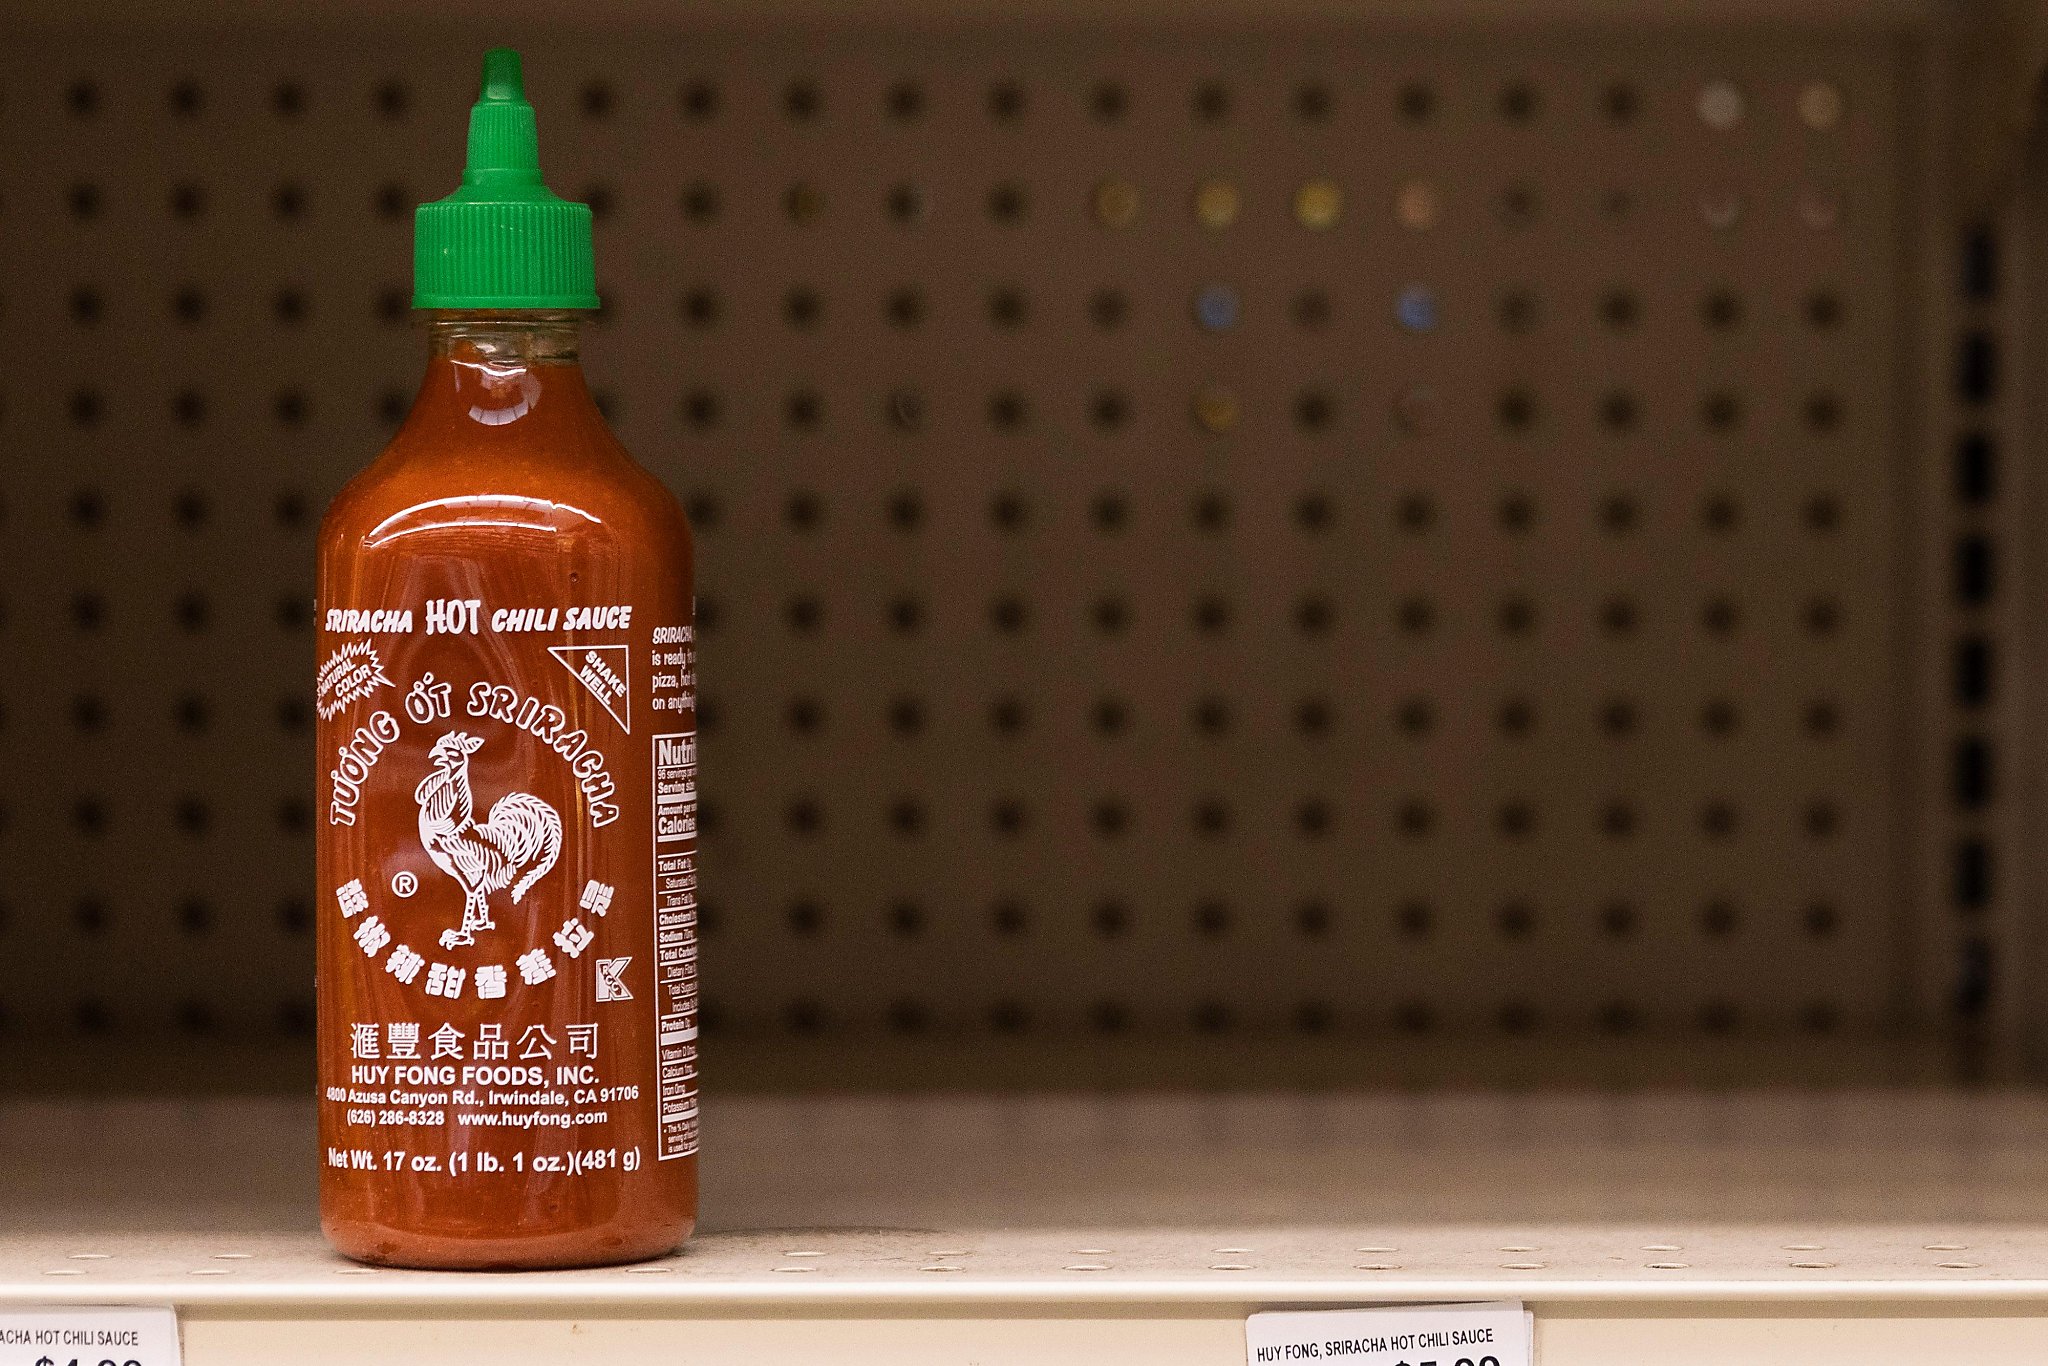 Got Sriracha? The price for a bottle of Huy Fong's iconic hot